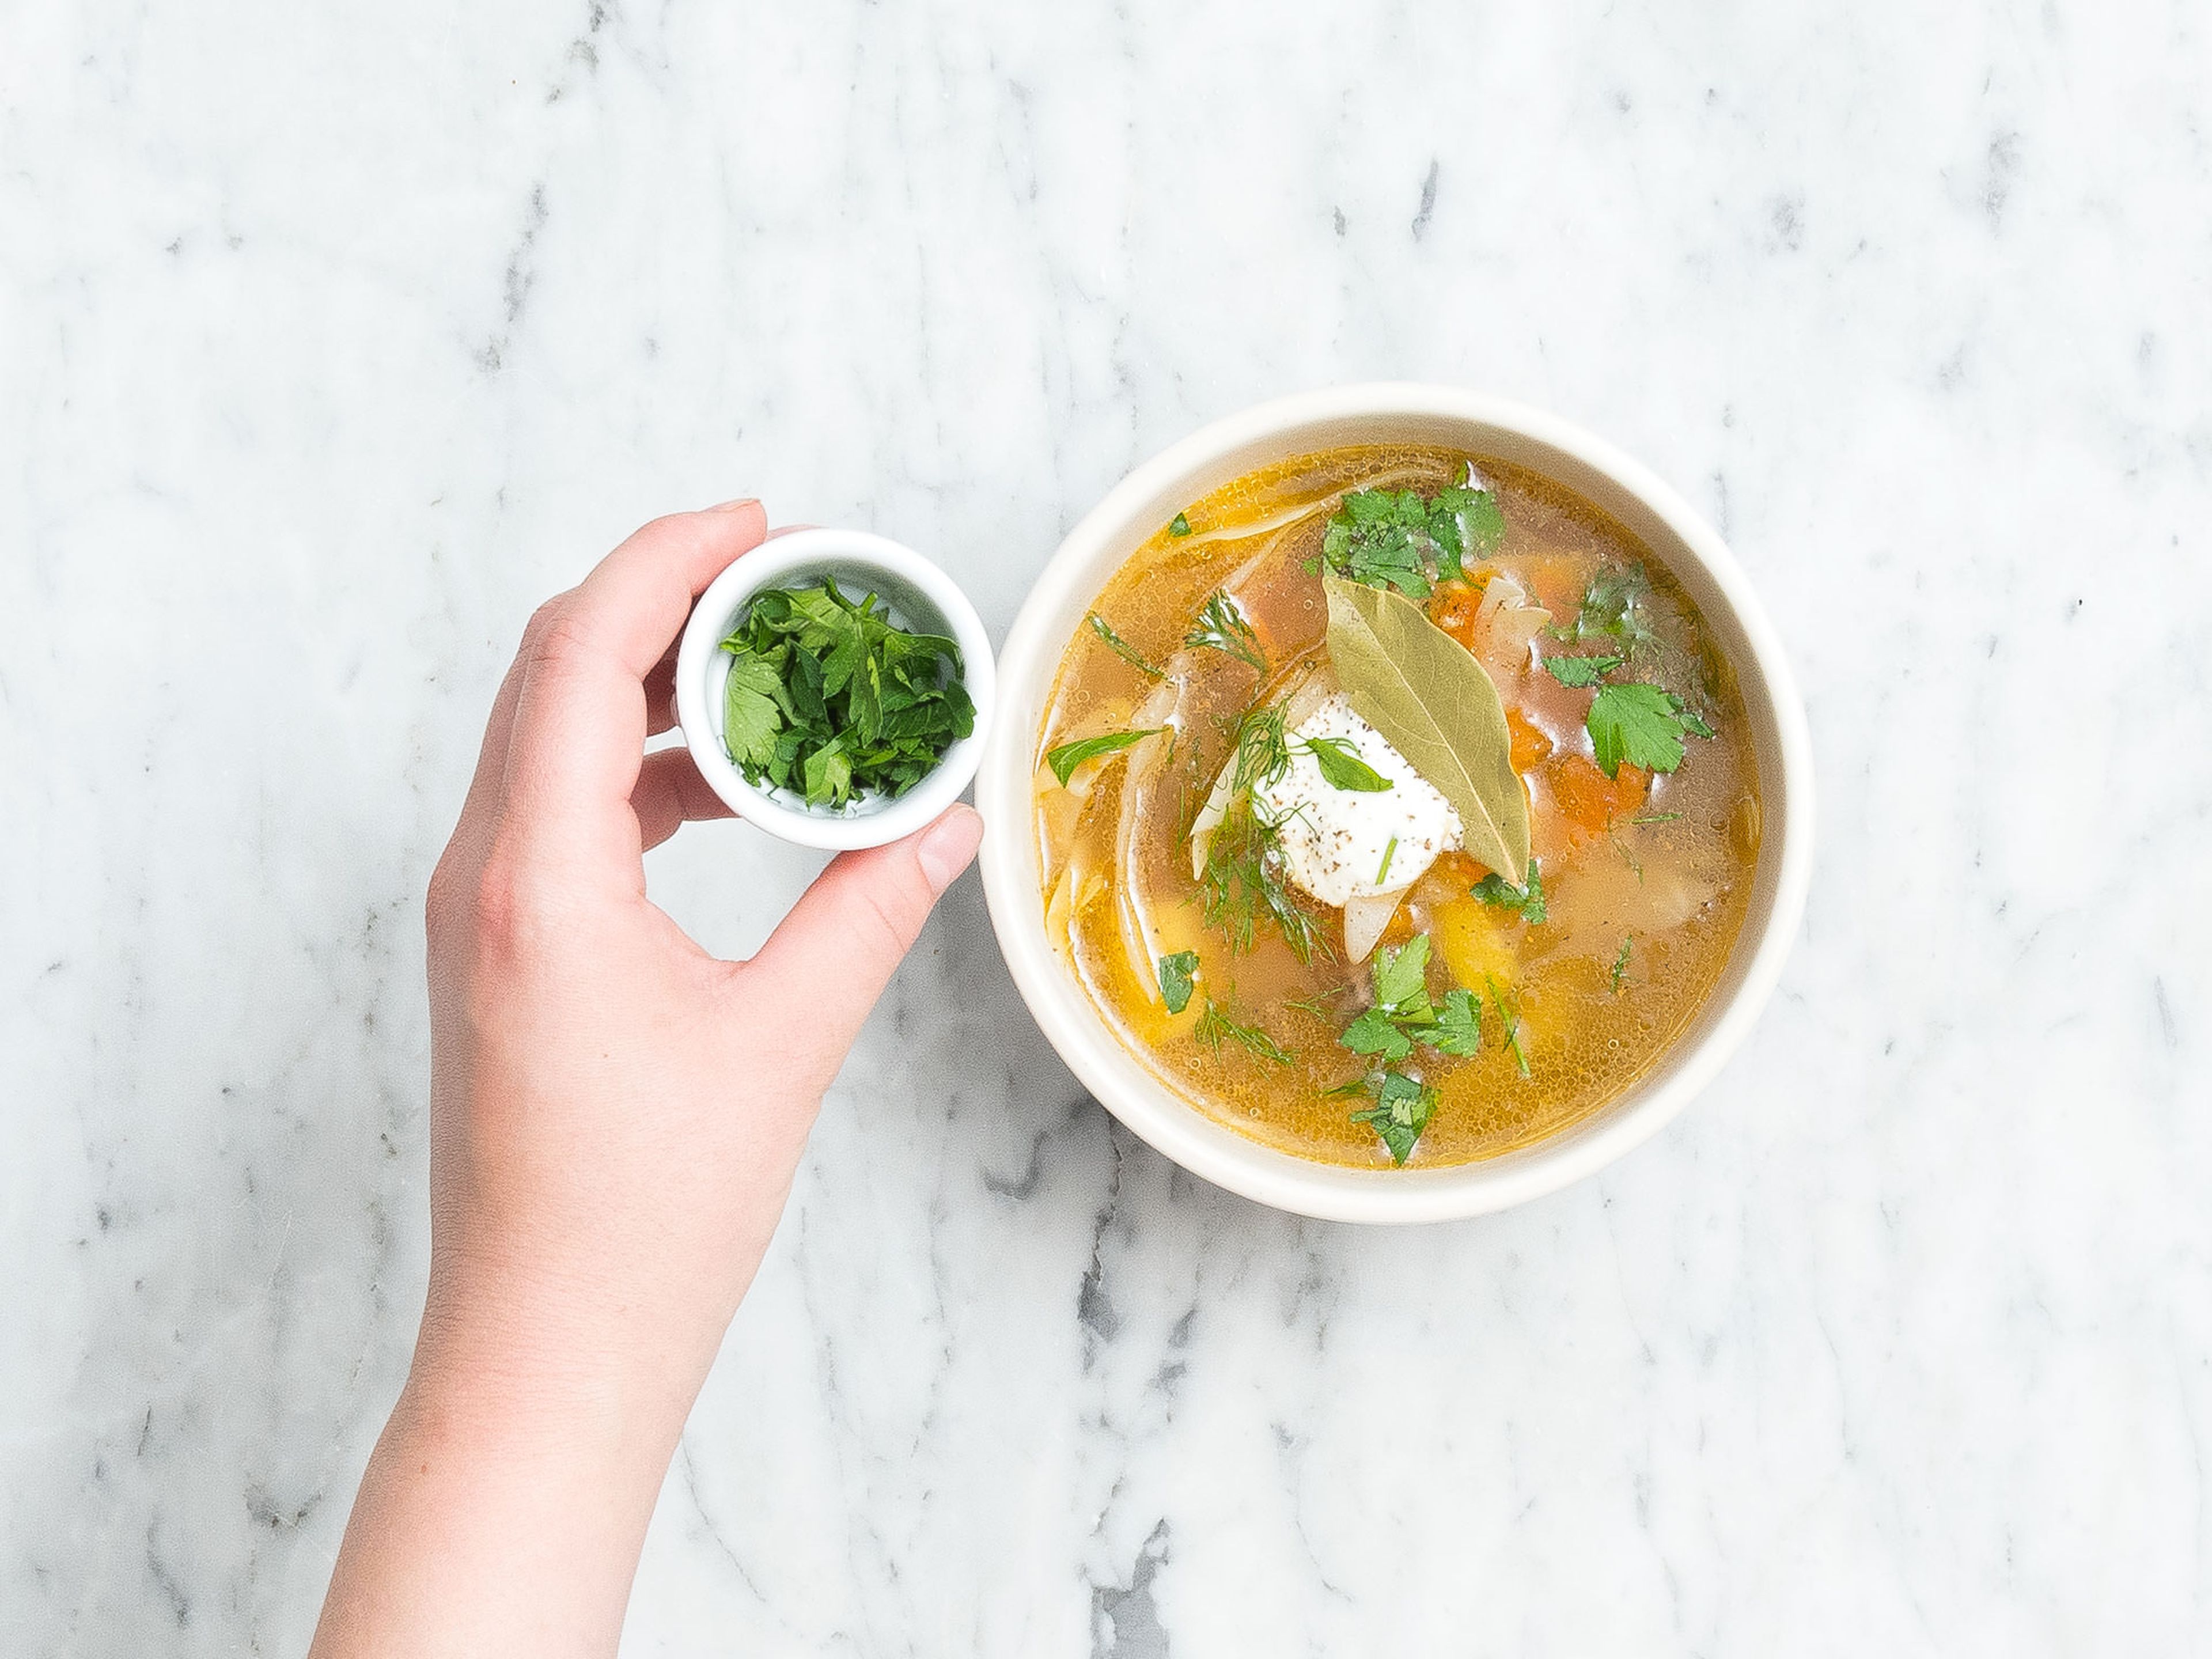 Serve cabbage soup in bowls with a dollop of sour cream, a bay leaf, dill, parsley, and season with more pepper. Enjoy!